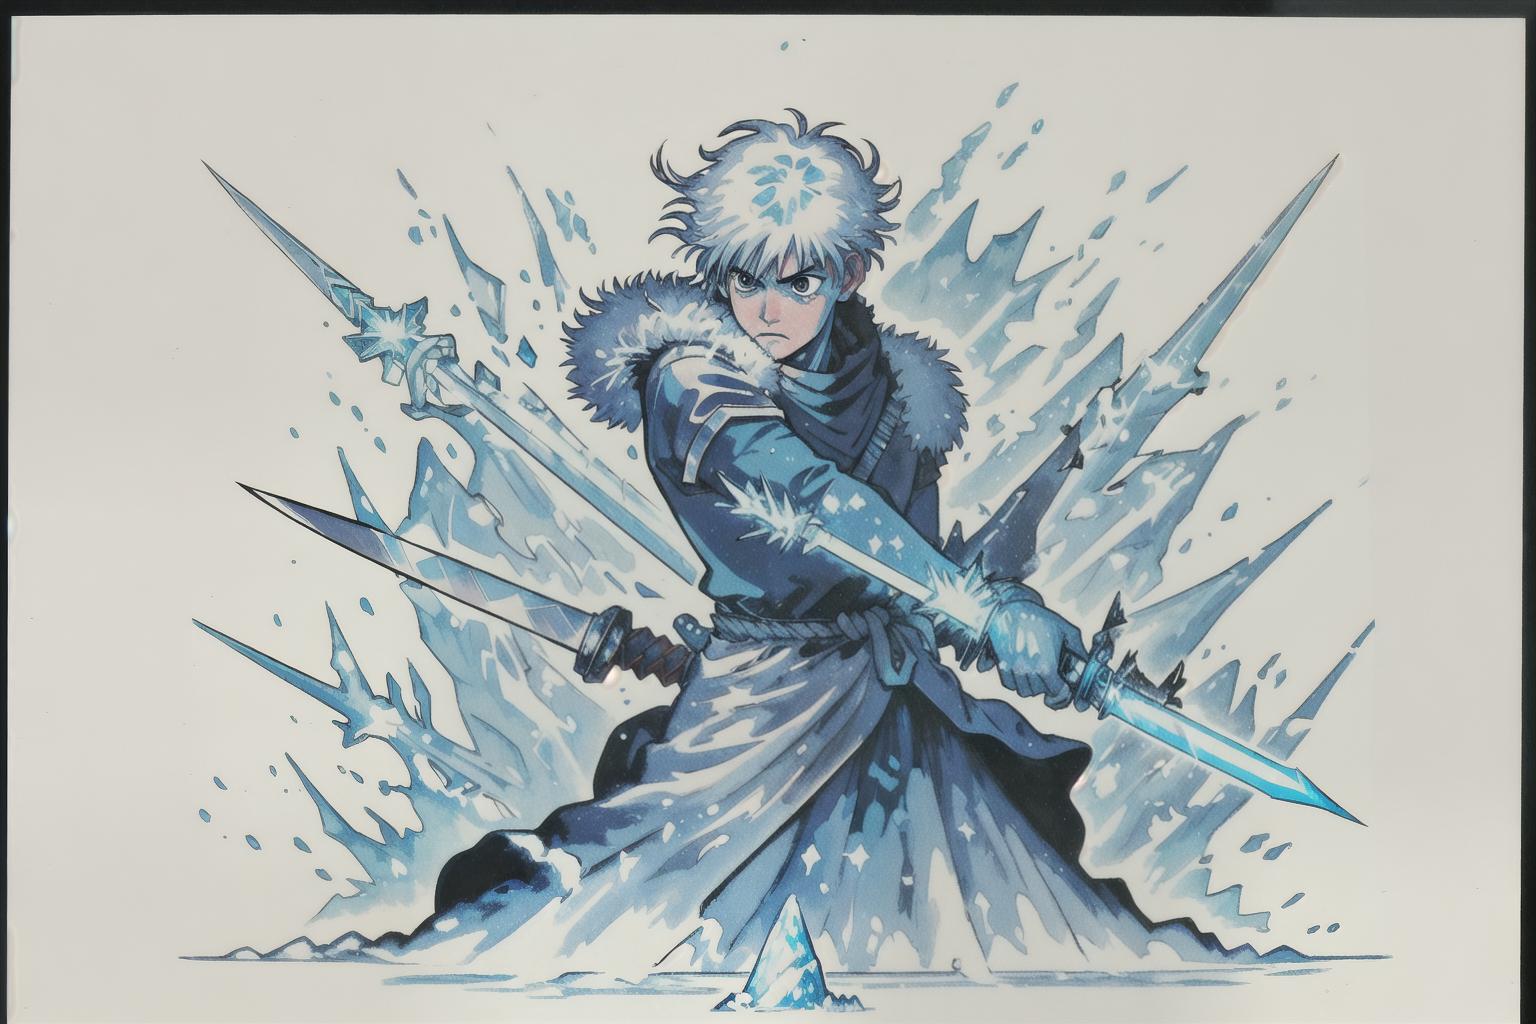  a ice sword, frost, 1980 anime